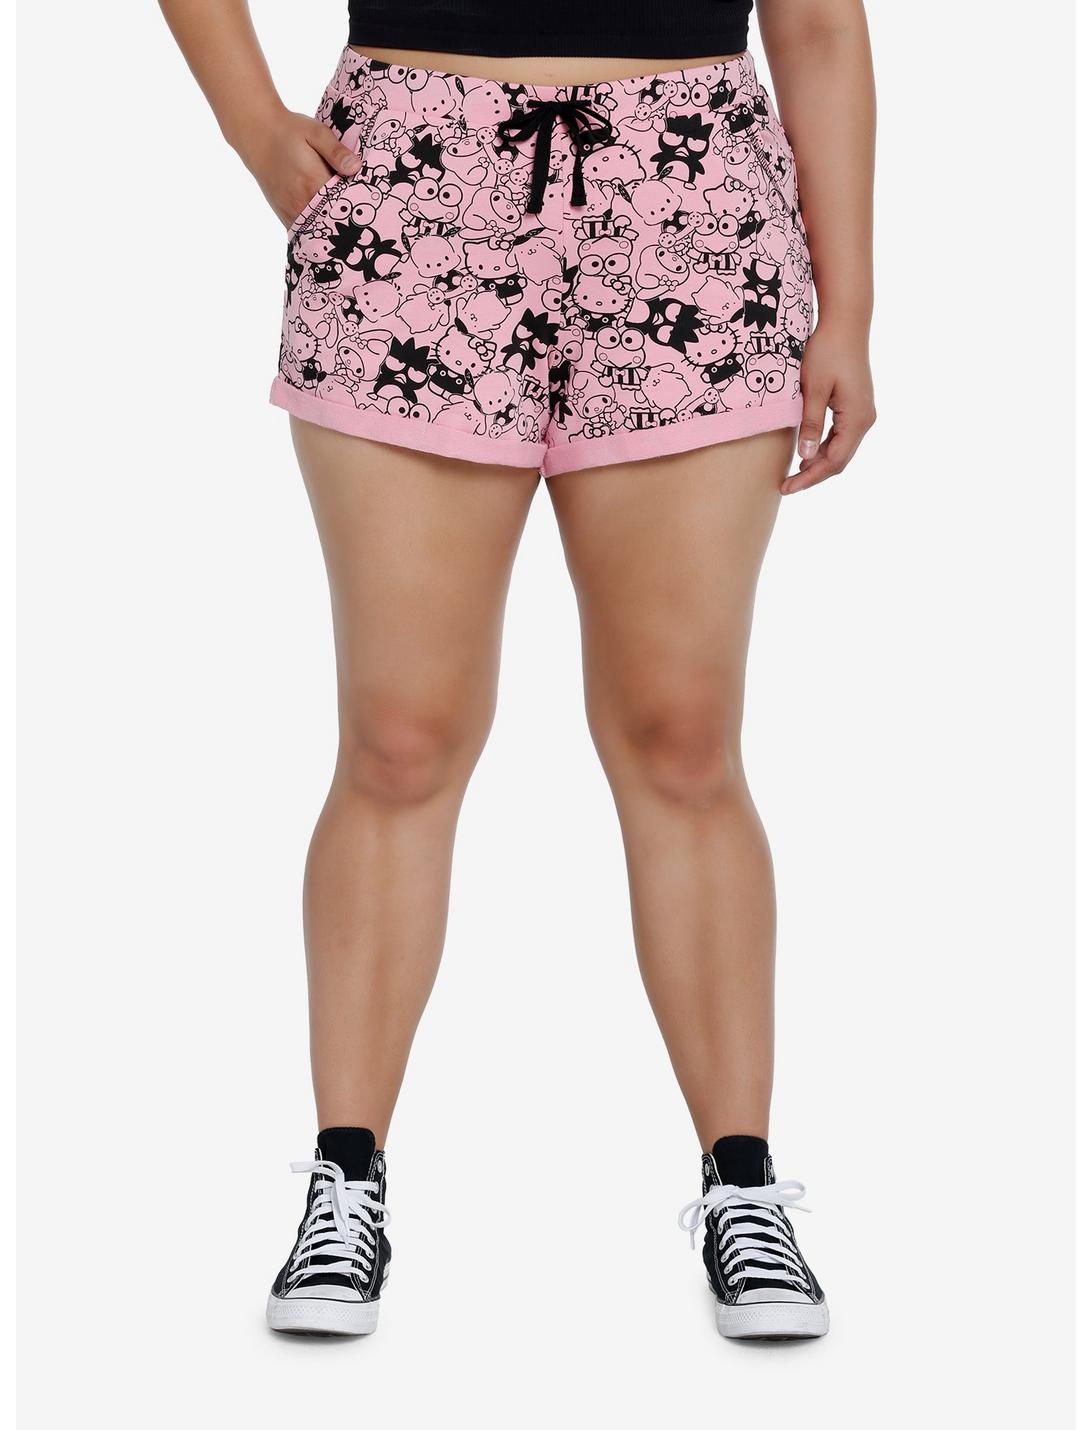 Hello Kitty & Friends Line Art Lounge Shorts Plus Size, PINK, hi-res